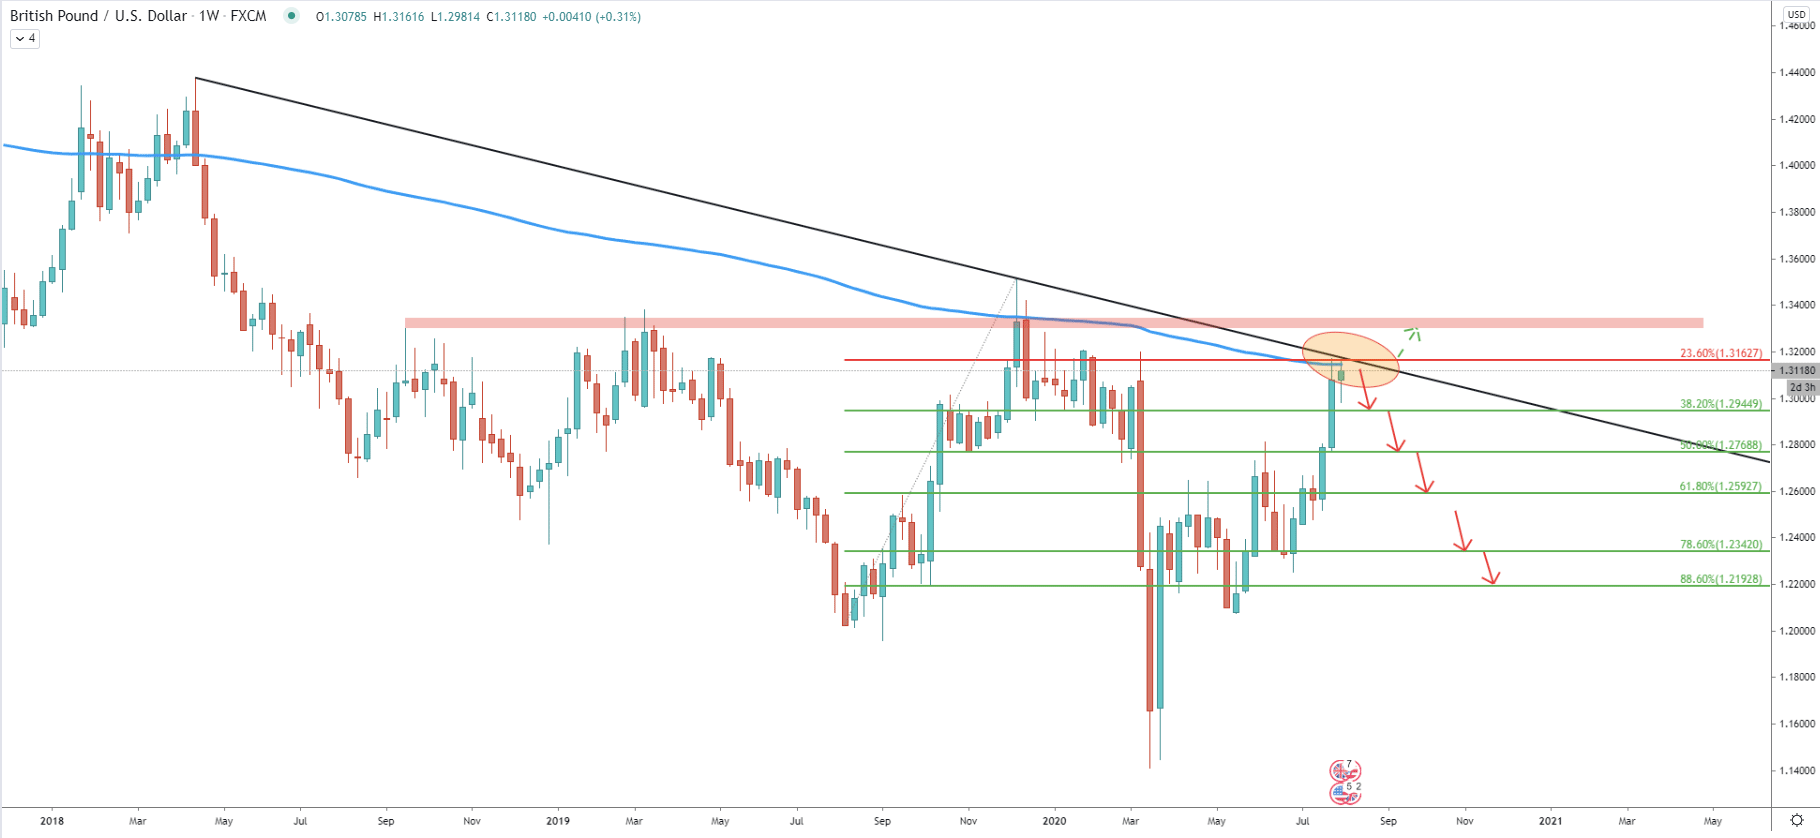 GBP/USD Weekly Technical Analysis 5 Aug 2020